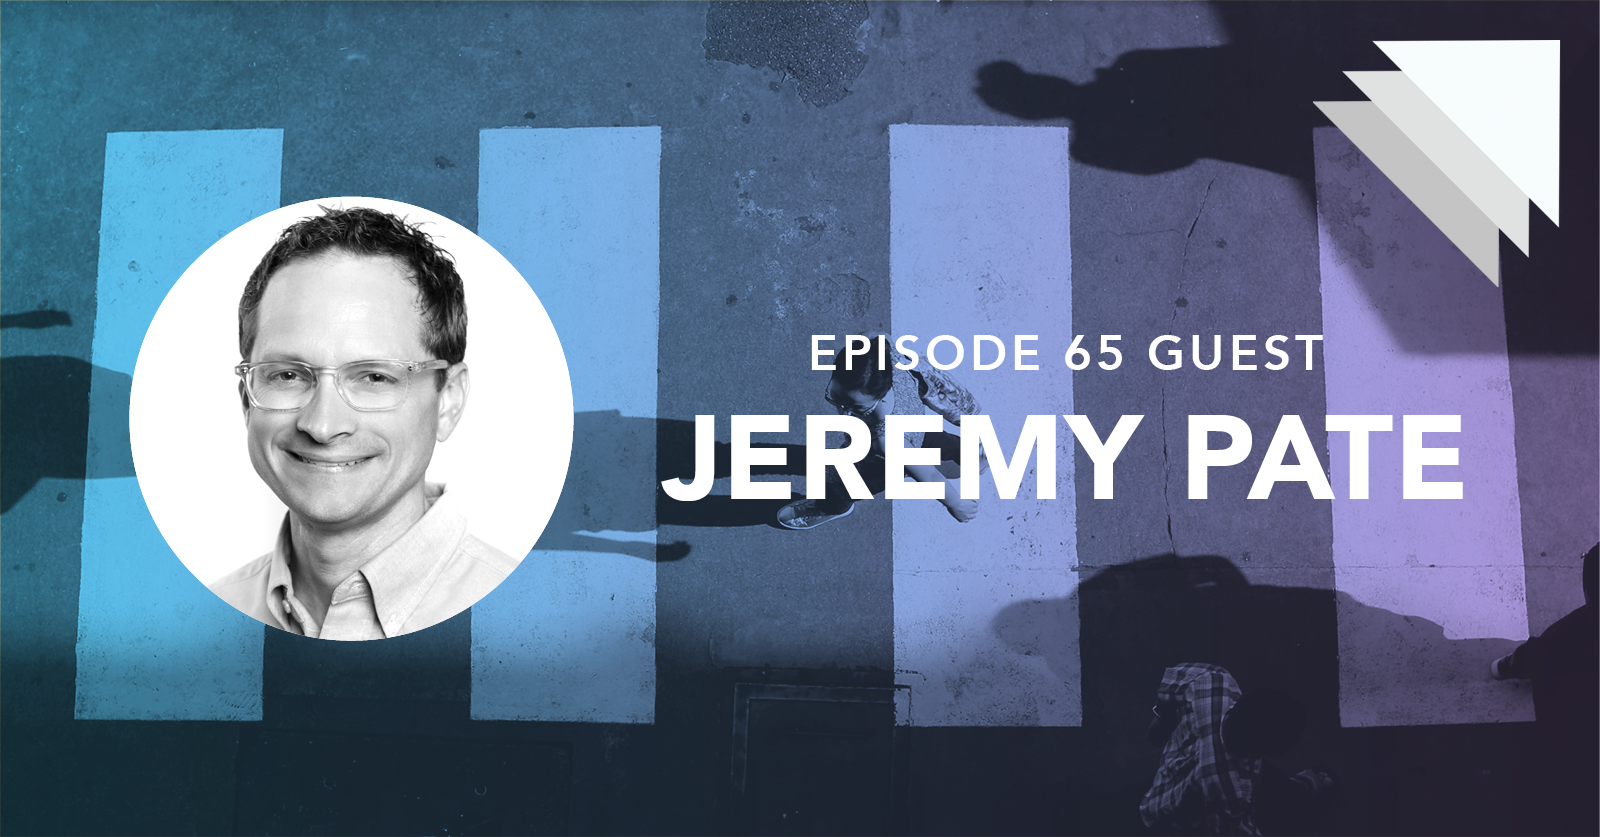 Episode 65 guest Jeremy Pate